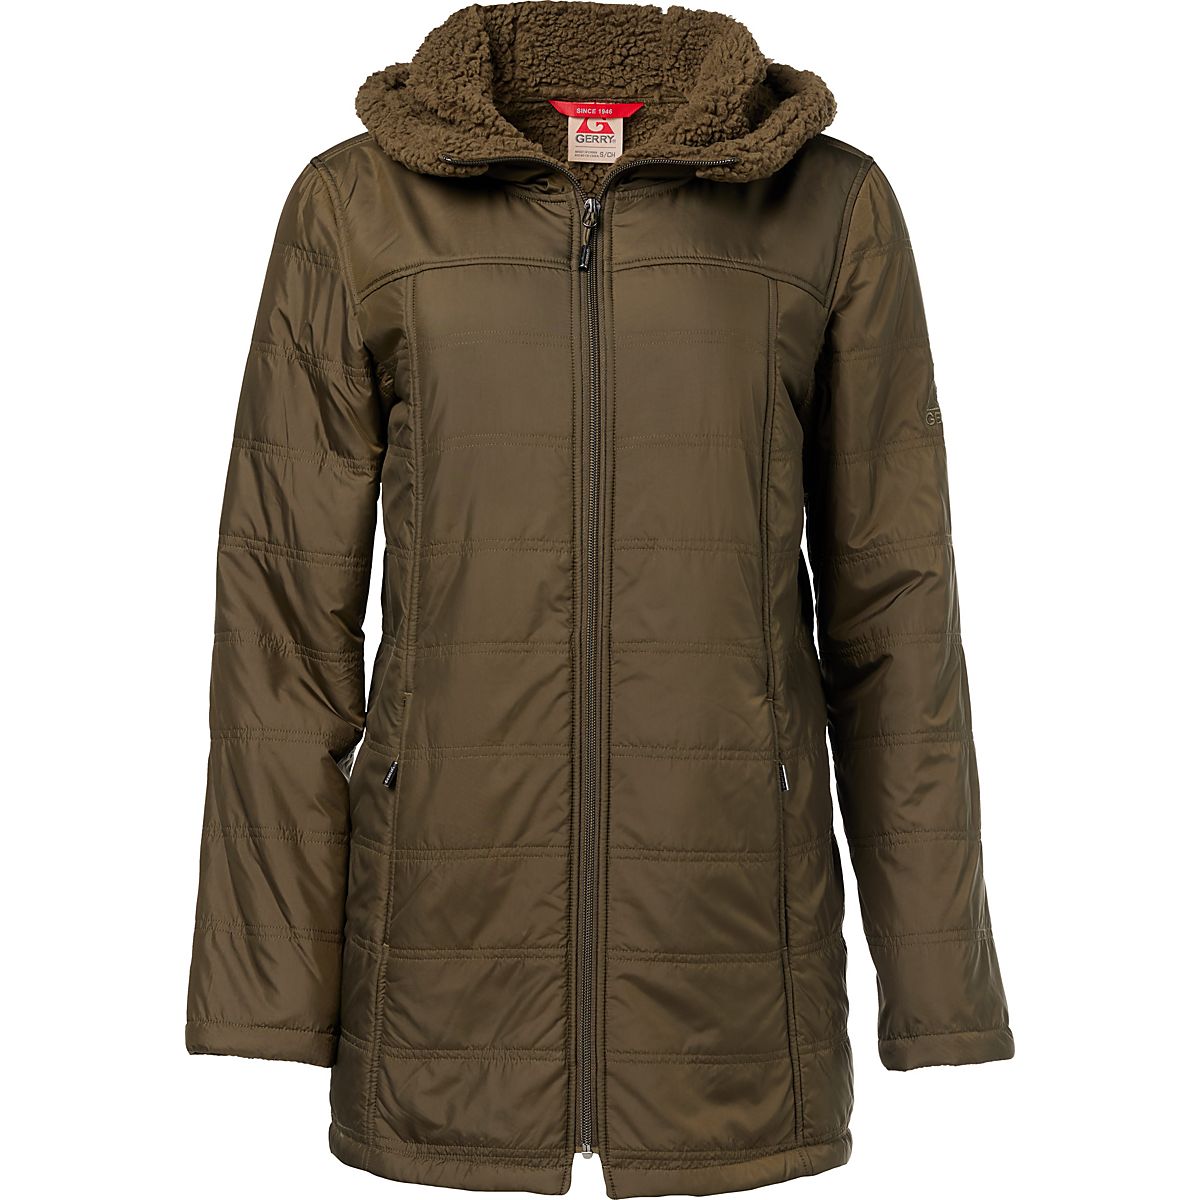 Gerry Women's Ursa Quilted Jacket | Free Shipping at Academy